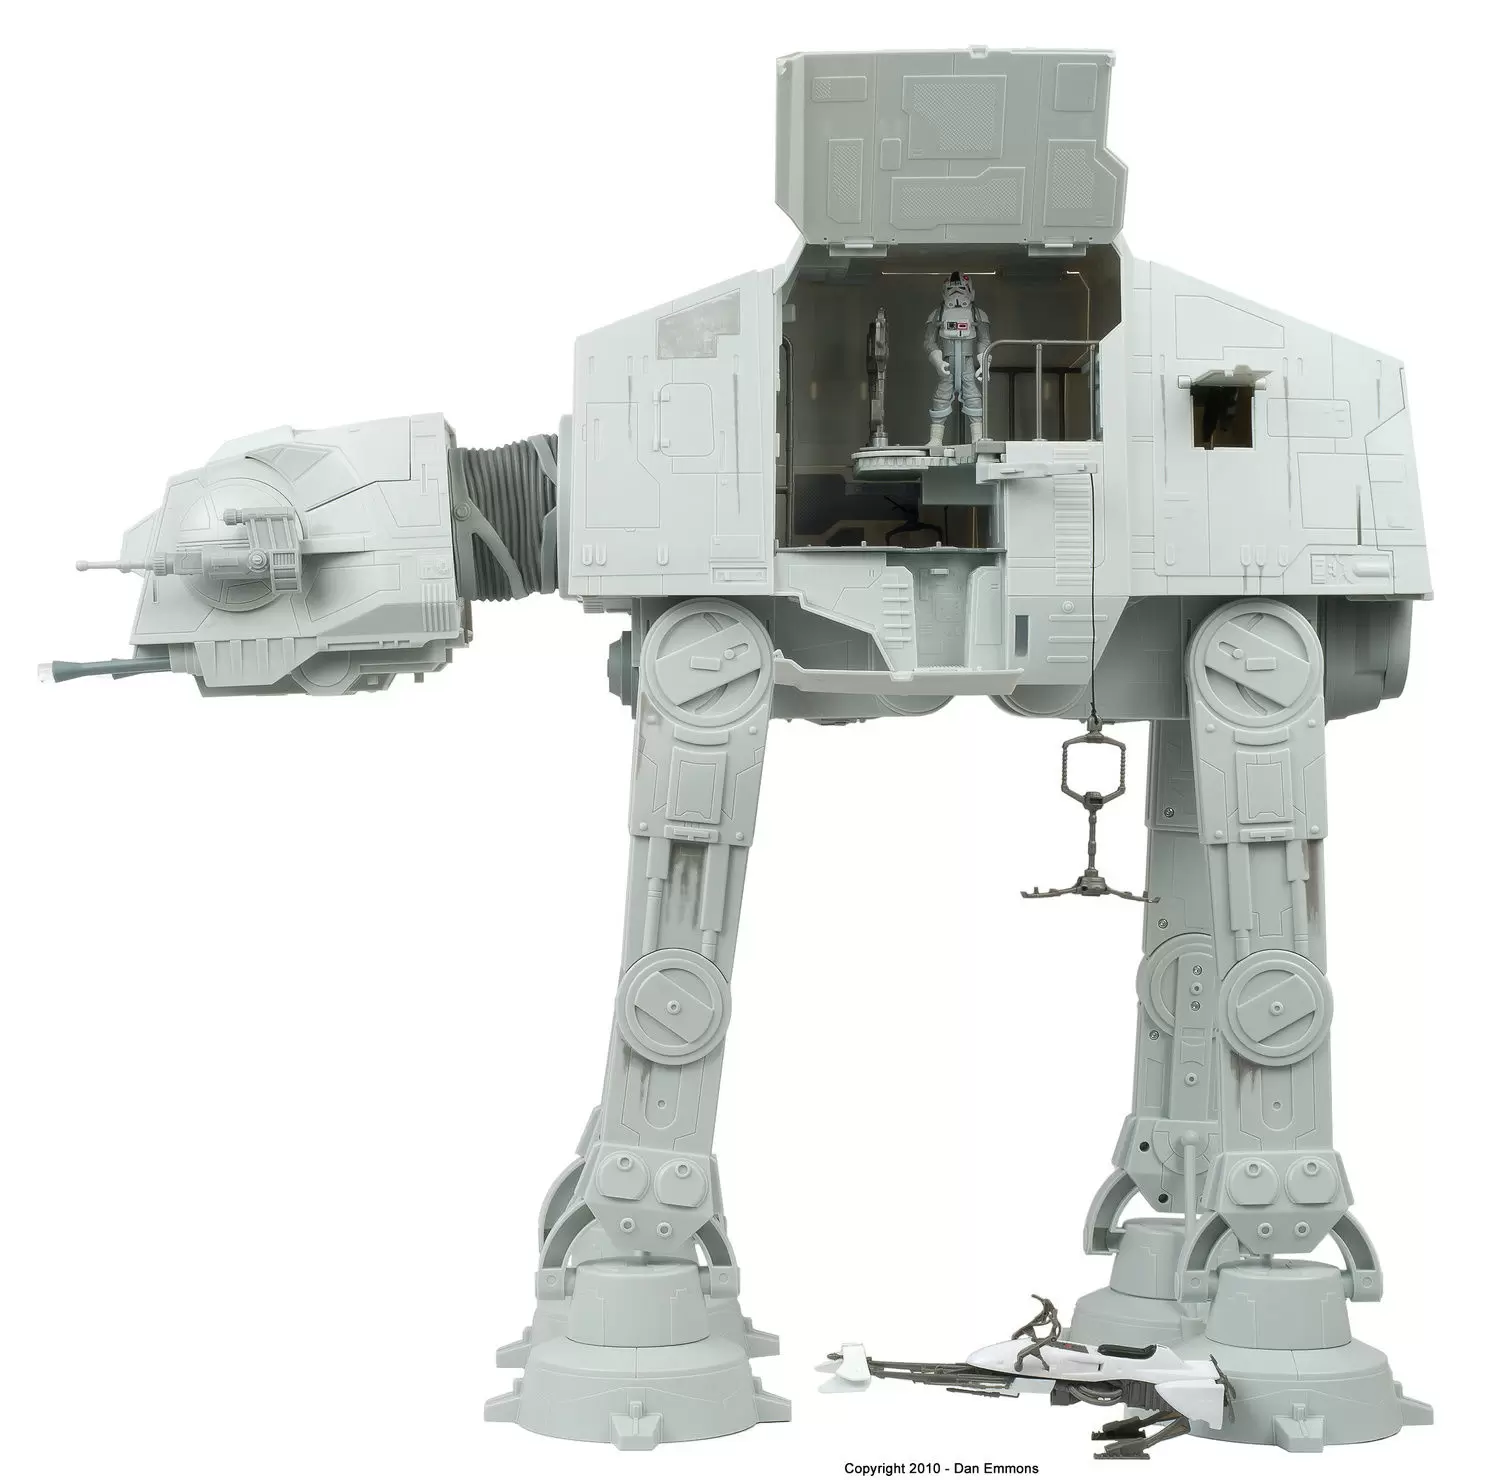 Shadows of the Dark Side - Imperial AT-AT